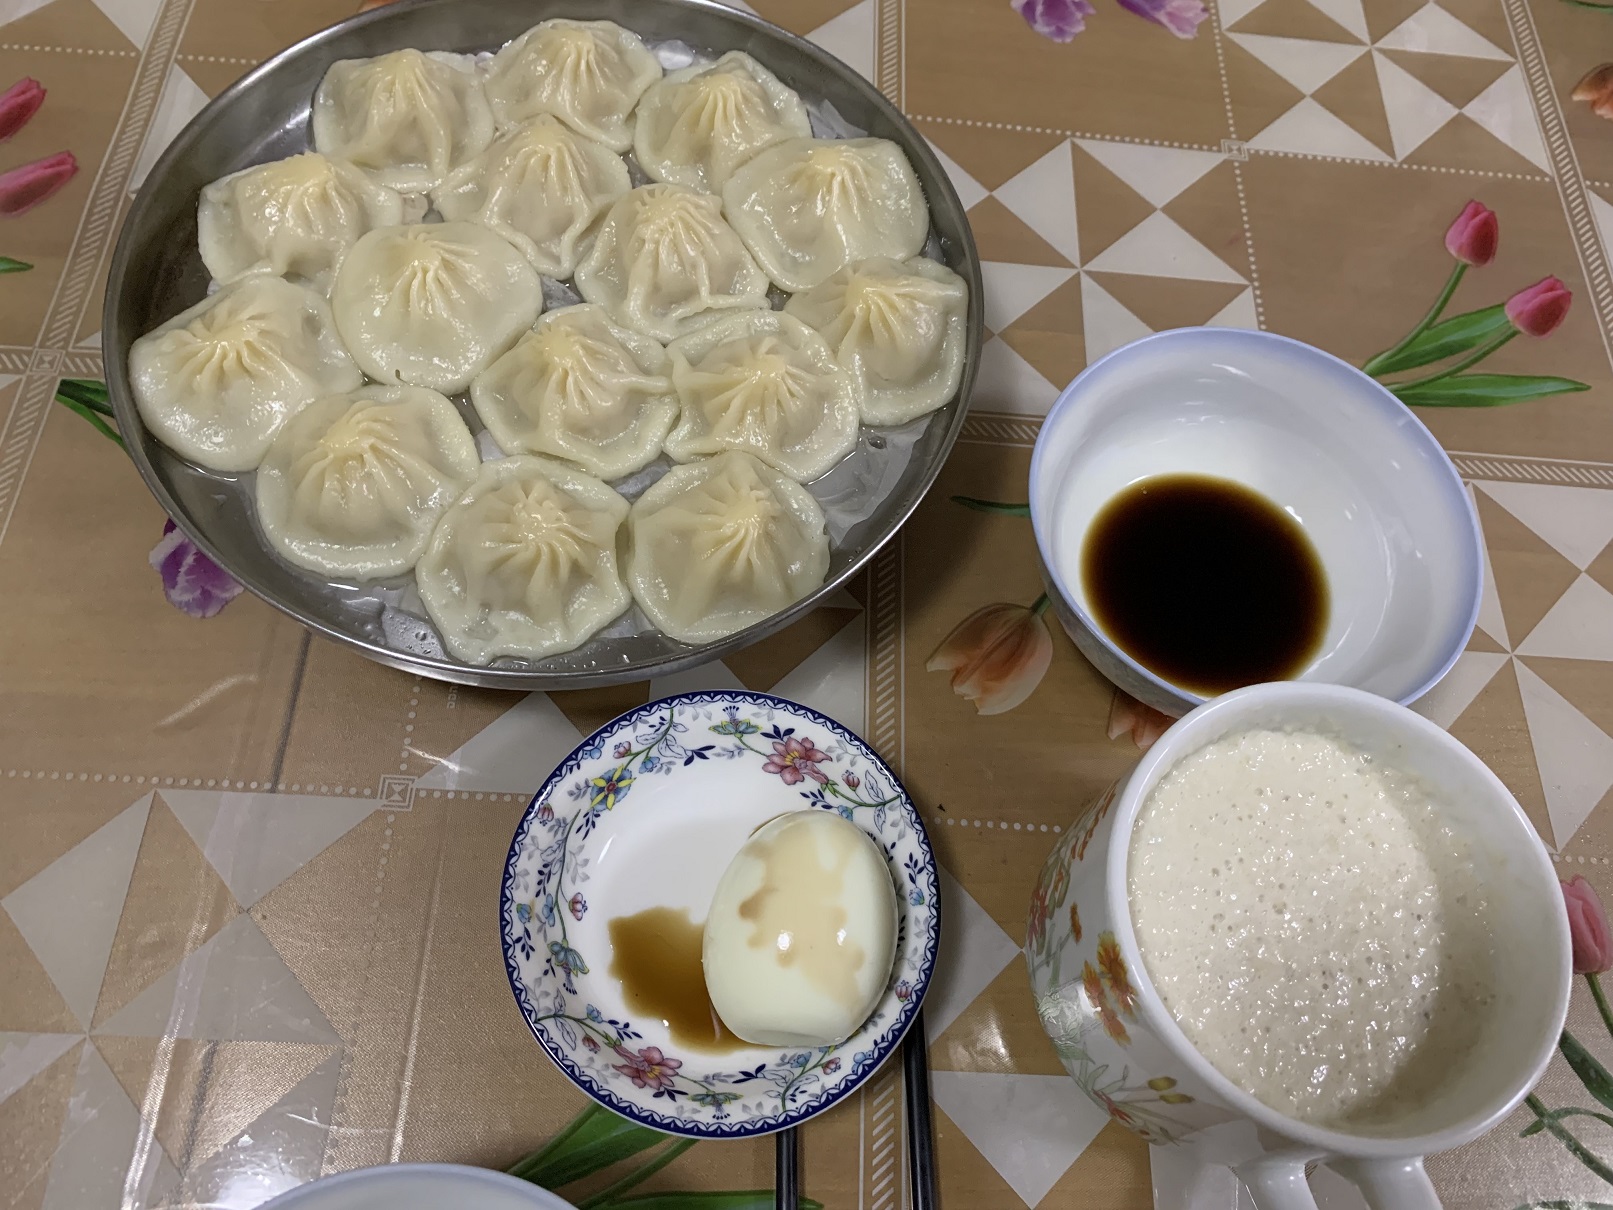 I finished the entire tray of 小笼包！